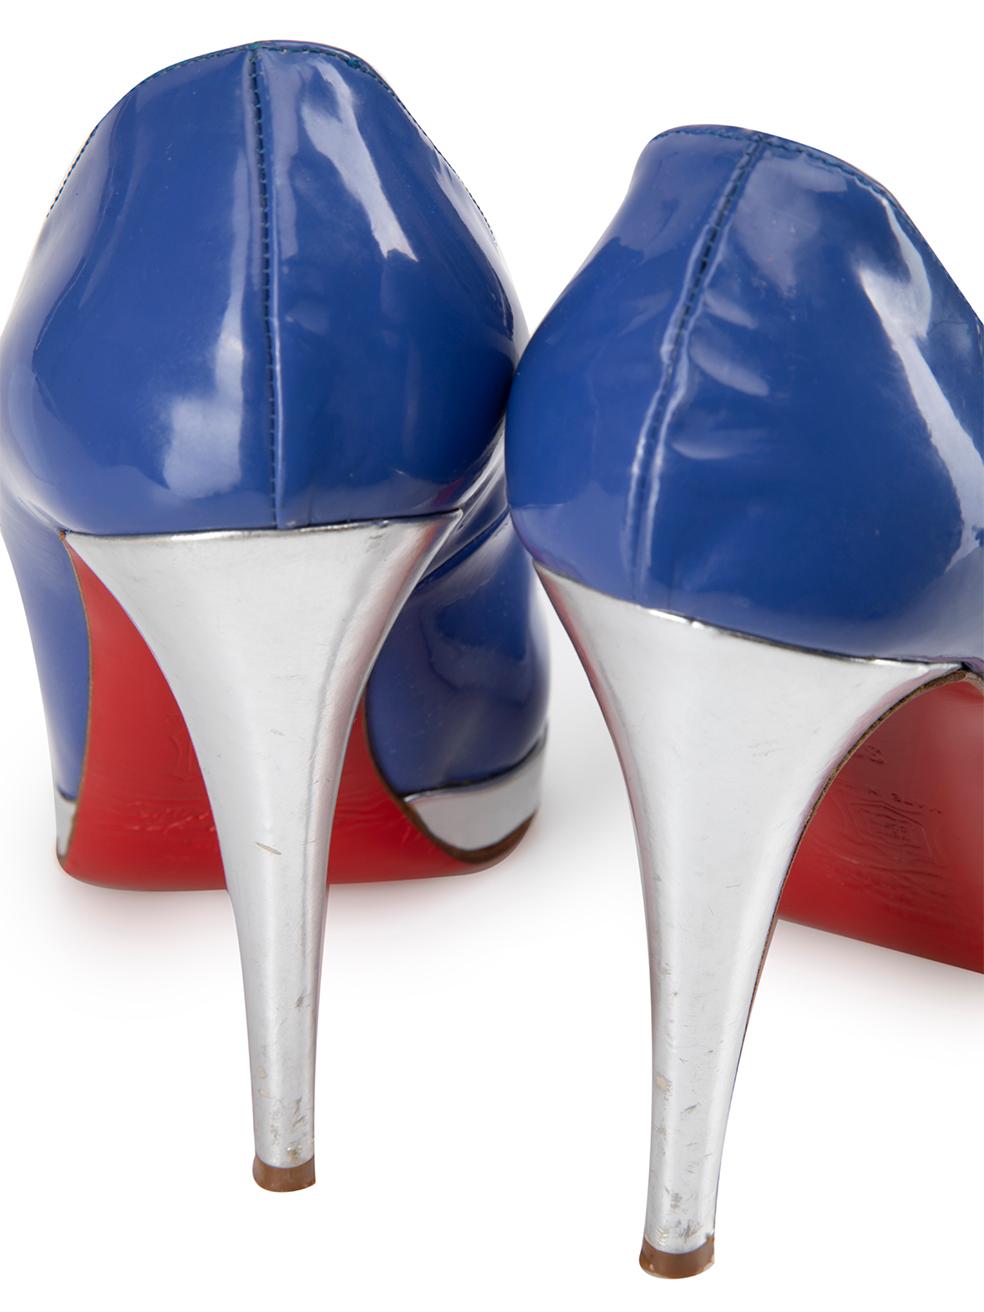 Christian Louboutin Women's Blue Patent Leather Silver Detail Pumps For Sale 1